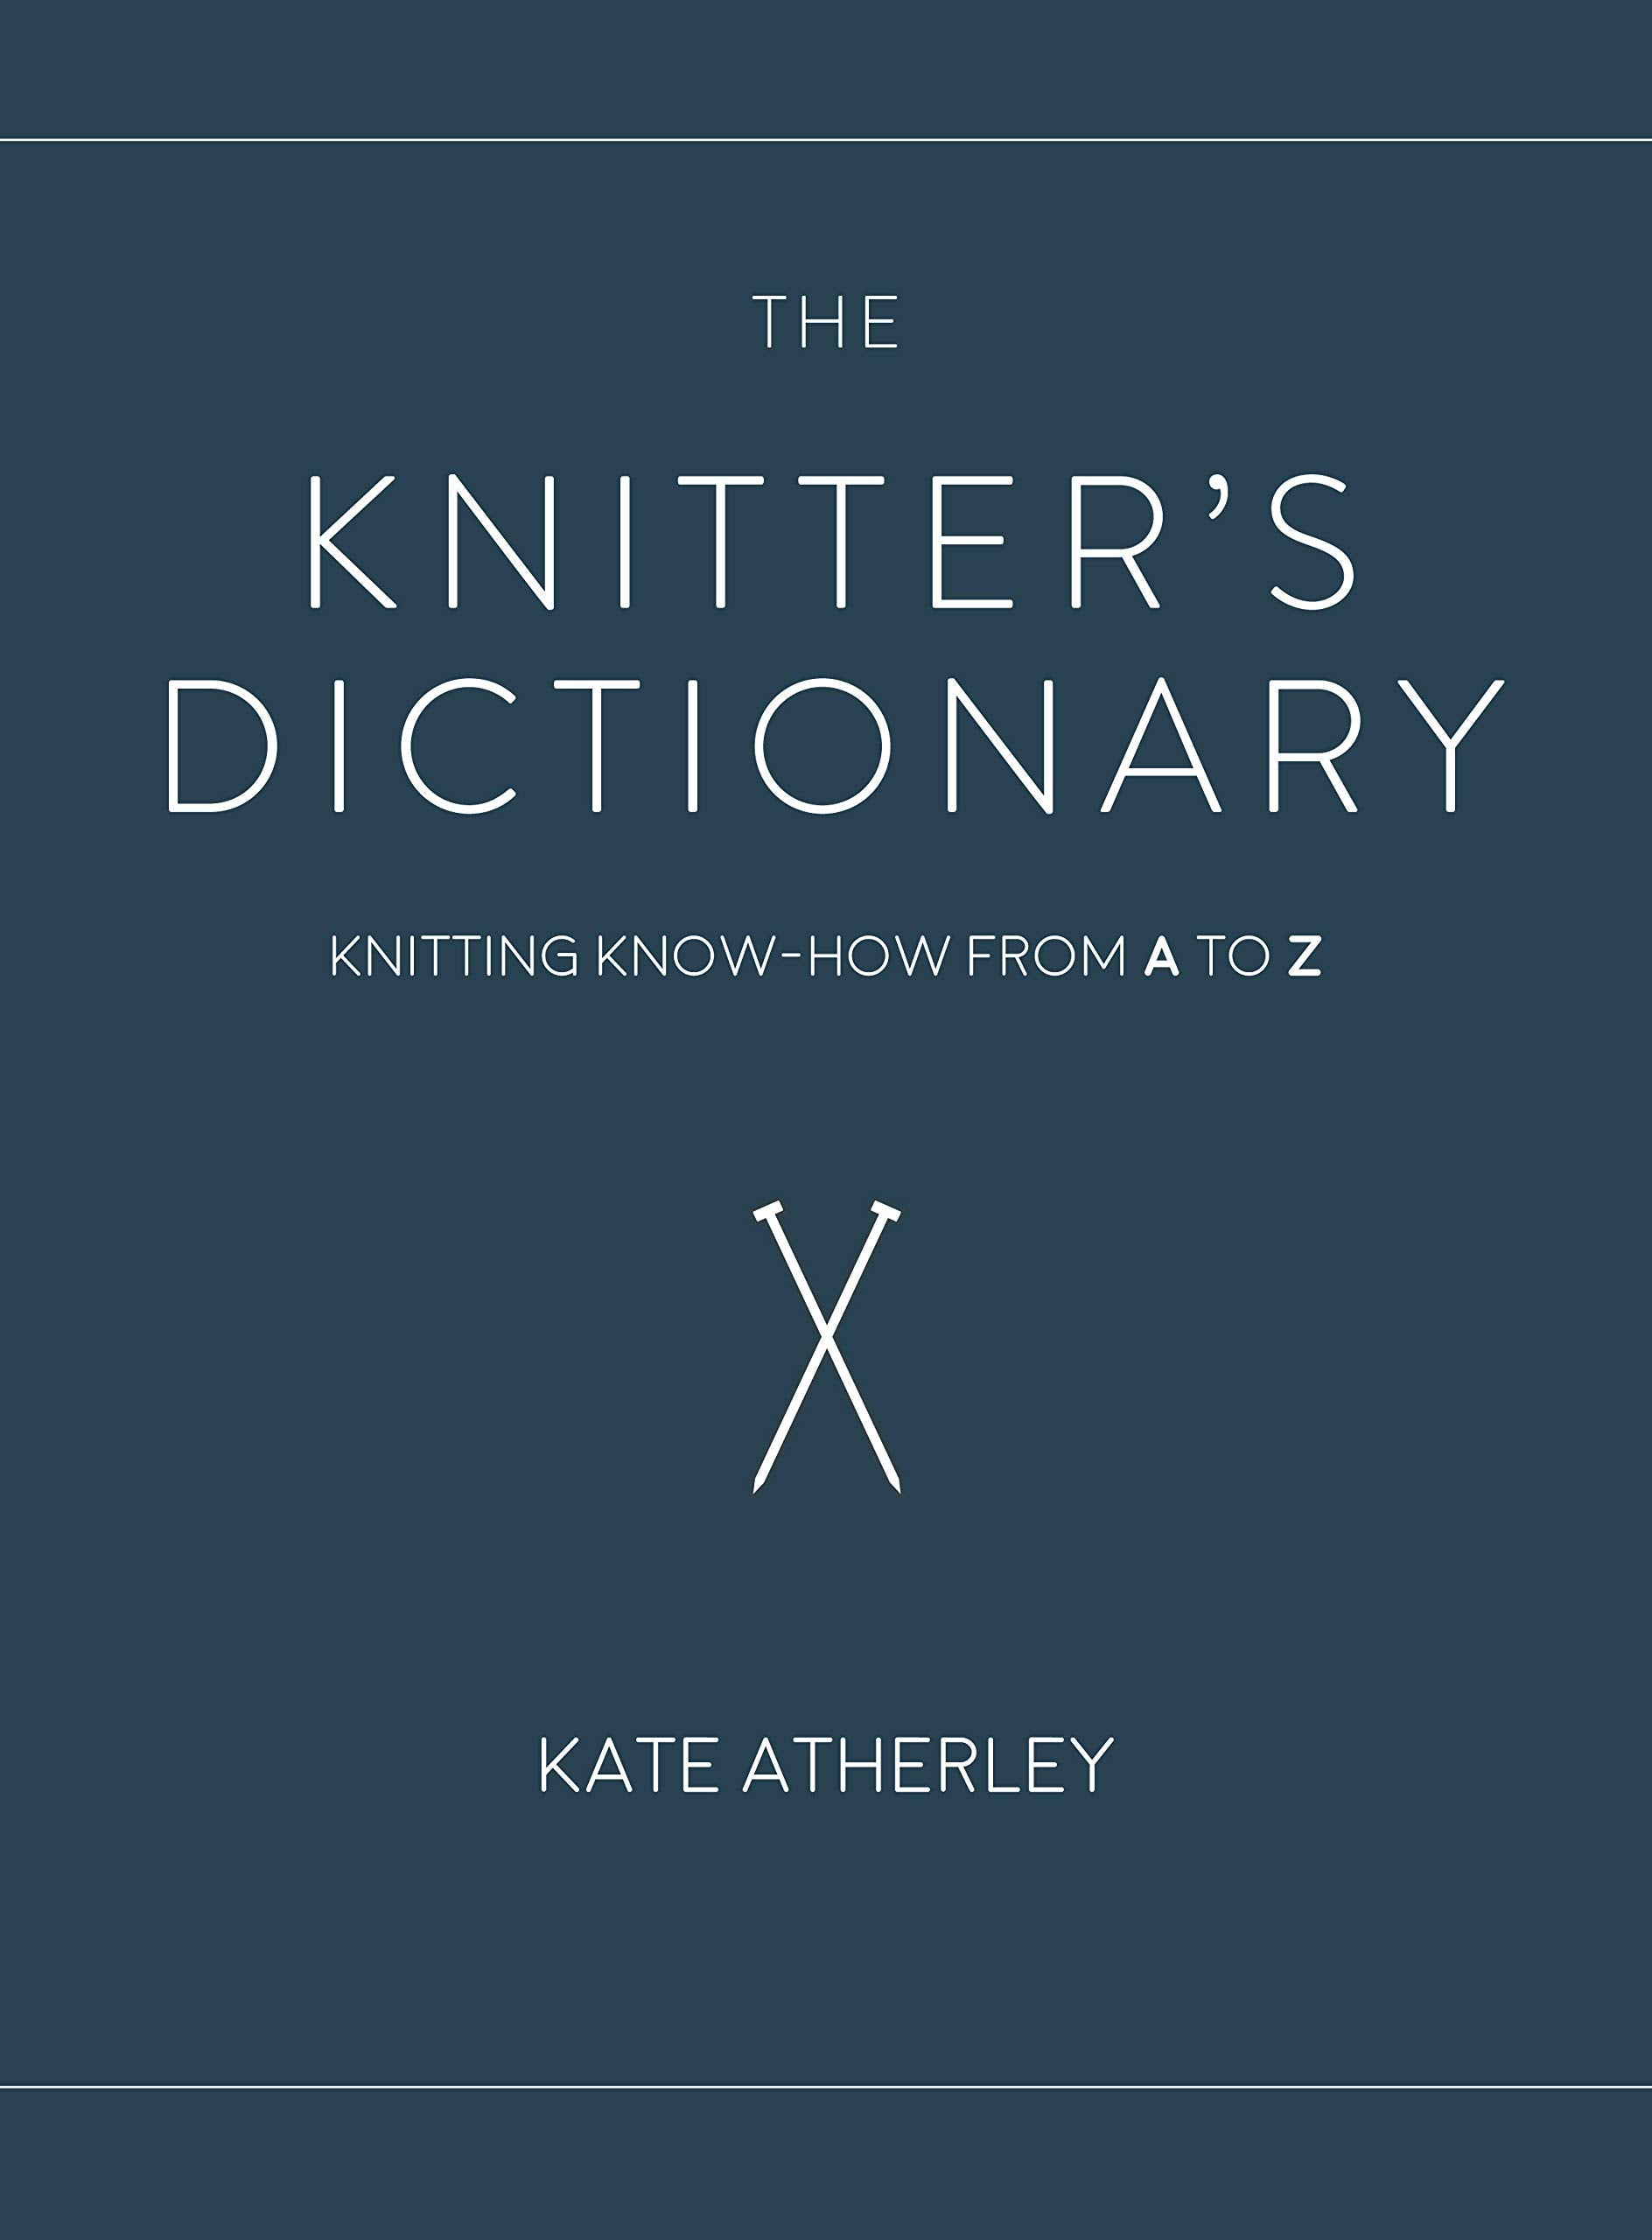 Knitter's Dictionary by Kate Atherley